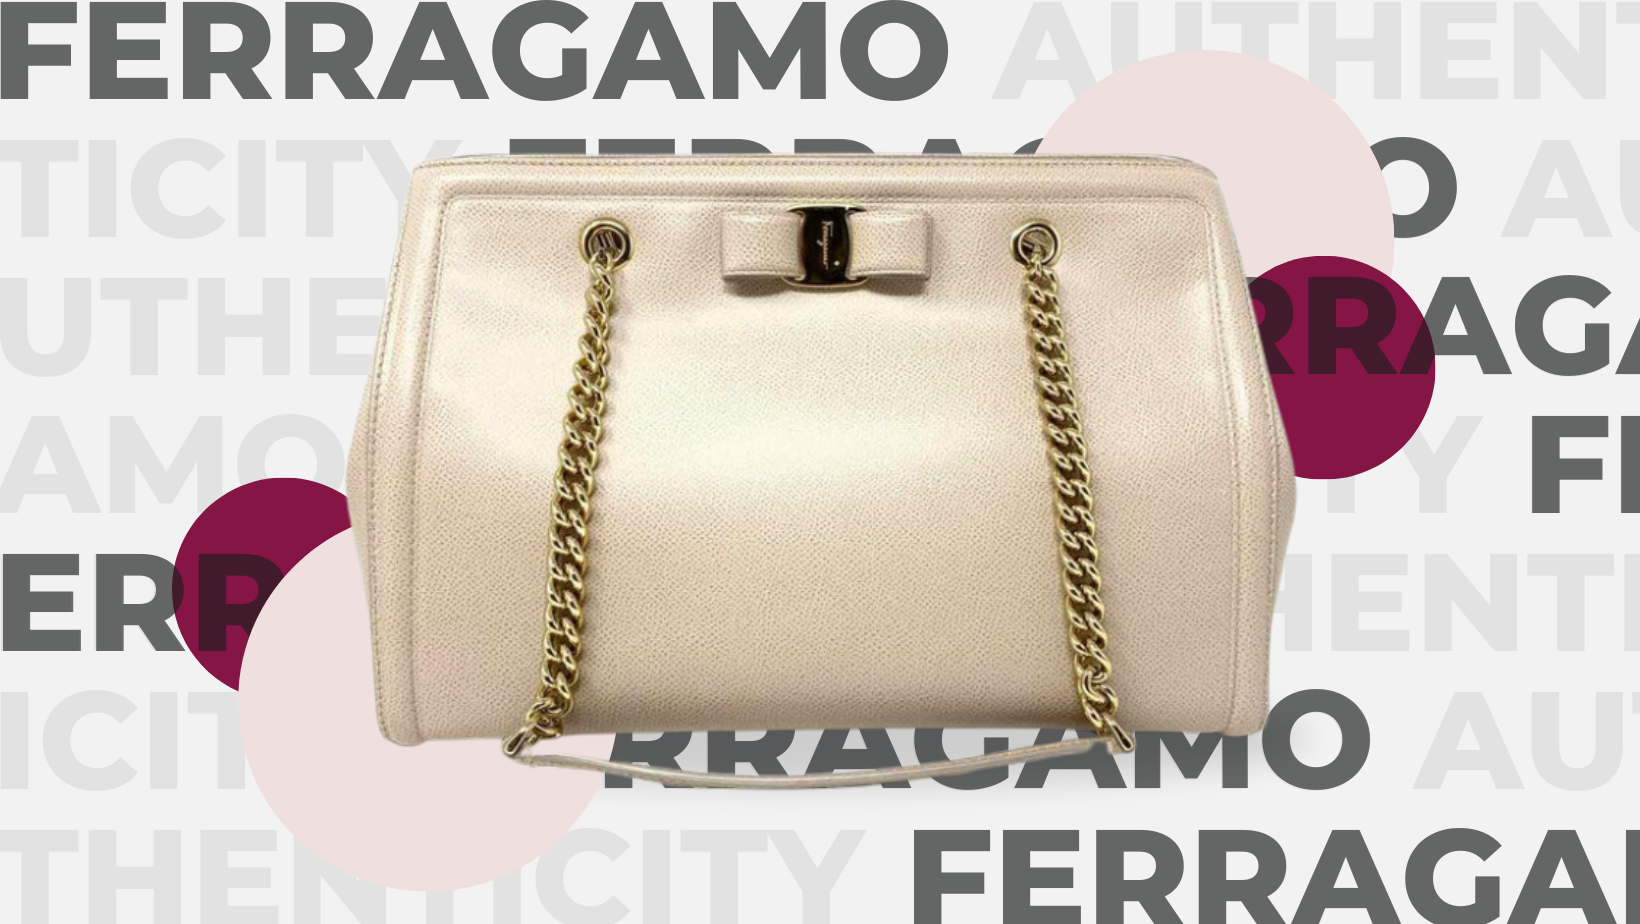 How To Know if Your Ferragamo Is Real